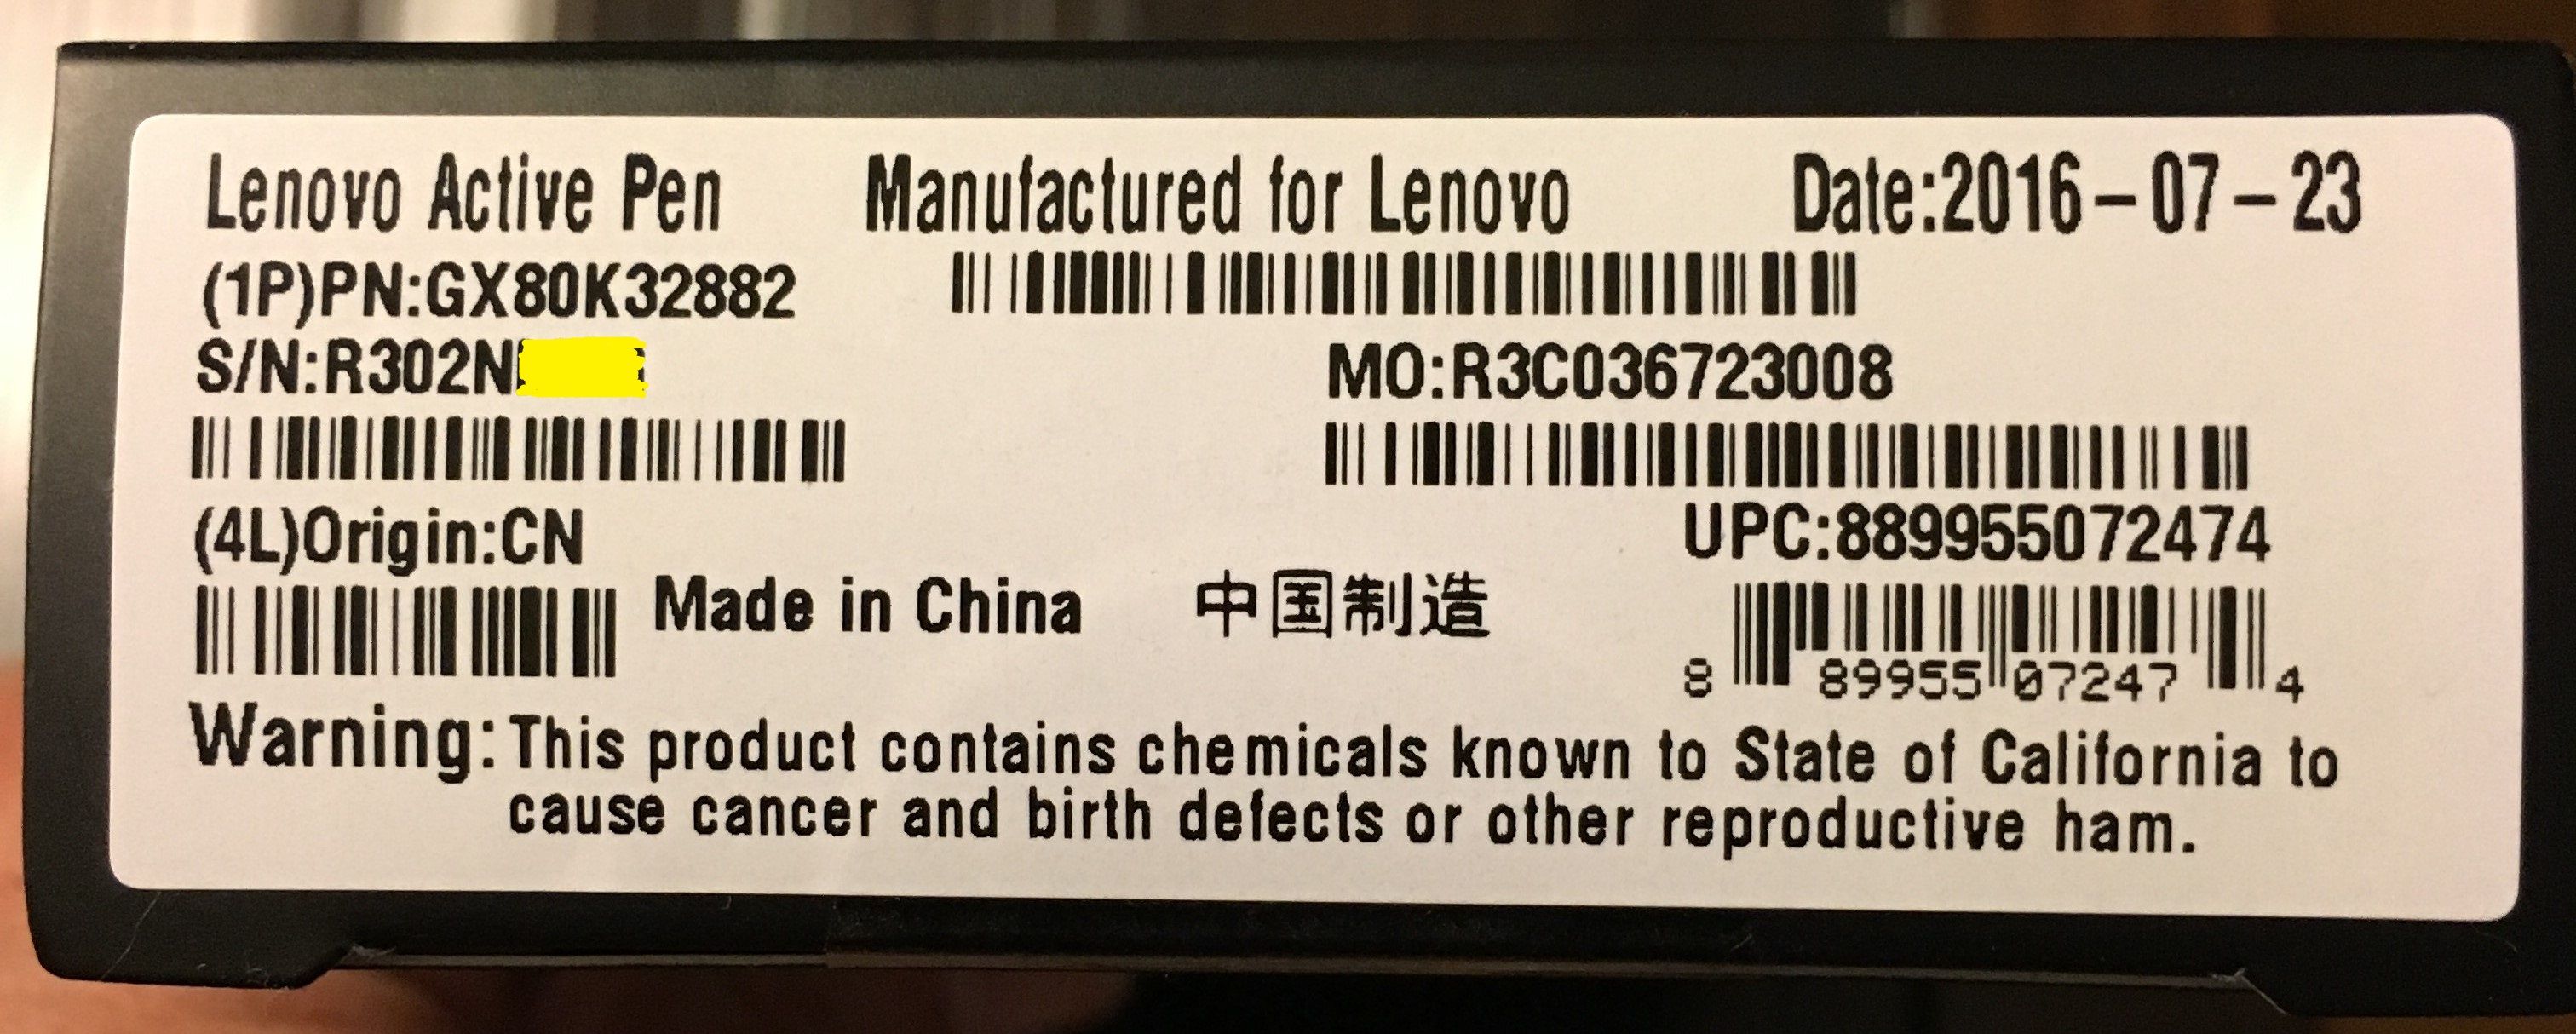 lenovo product lookup by serial number